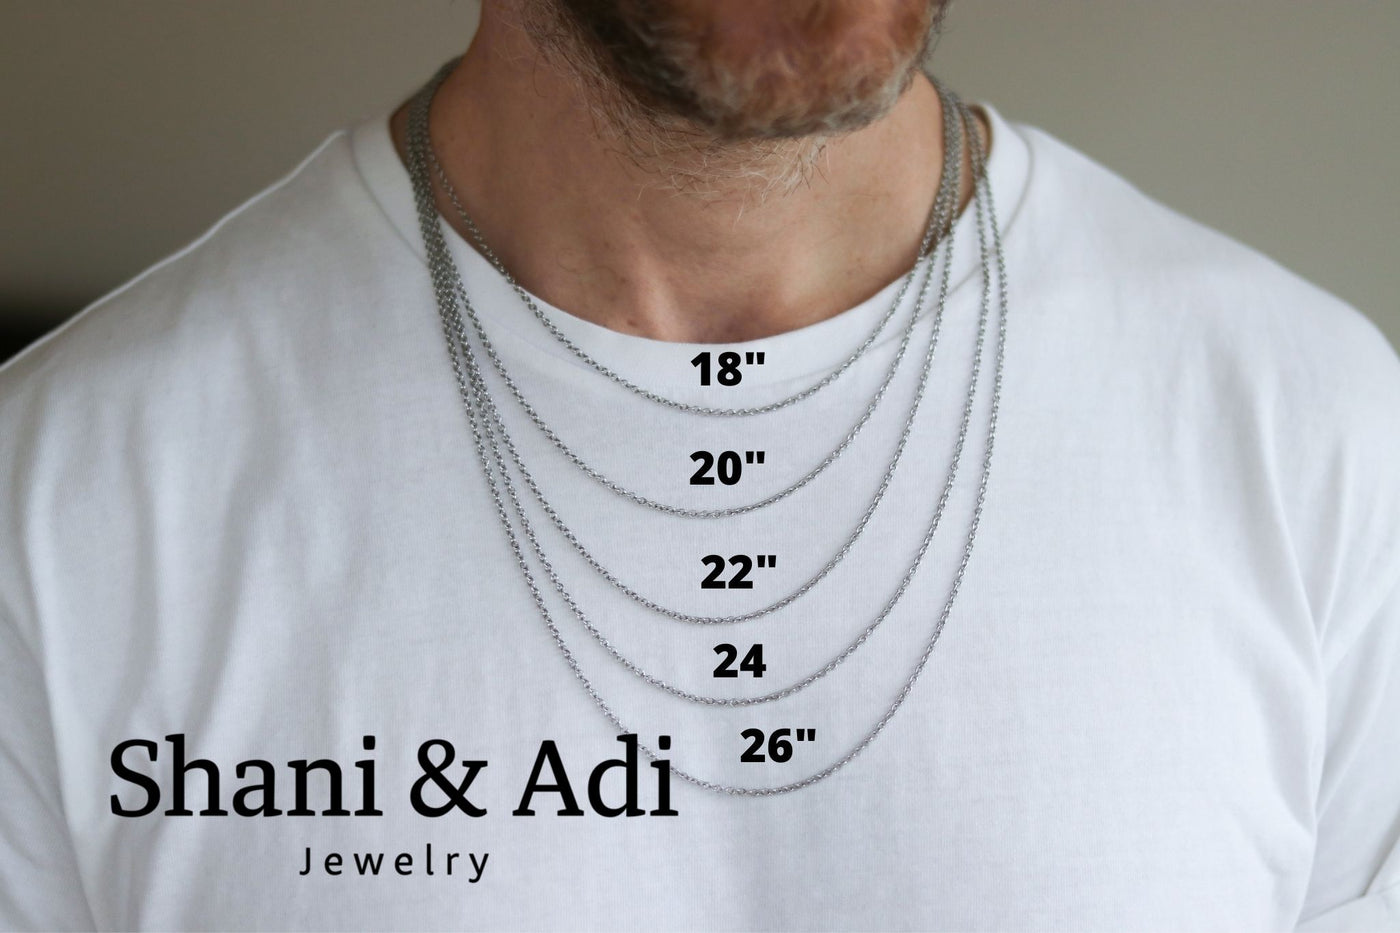 Stainless Steel Necklace Chain Men 4mm 22inch Italian Solid Figaro Chain |  Amazon.com